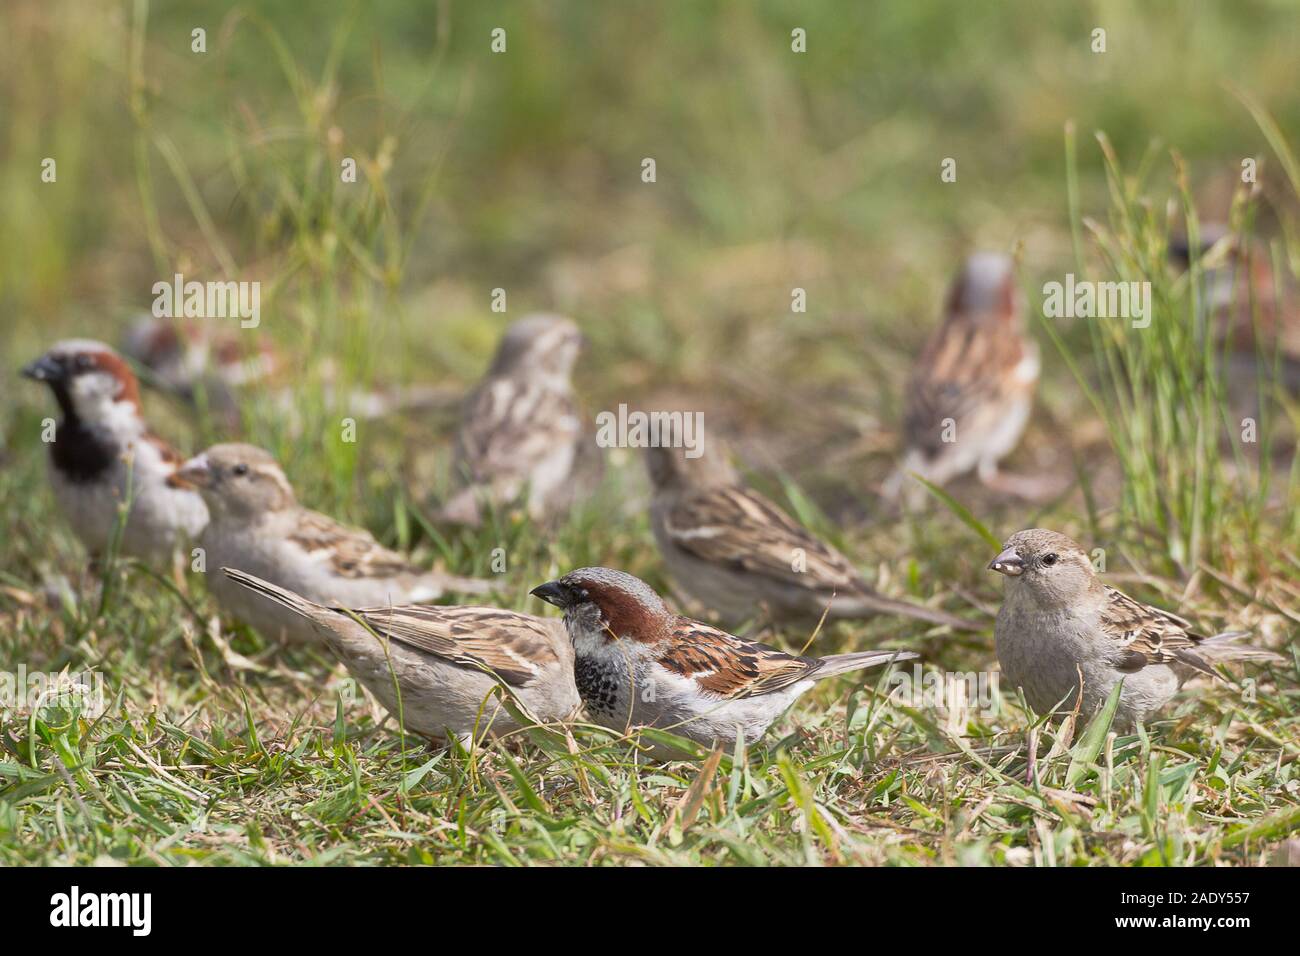 Gang of boisterous sparrows searching for seeds in the grass. #2 Stock Photo